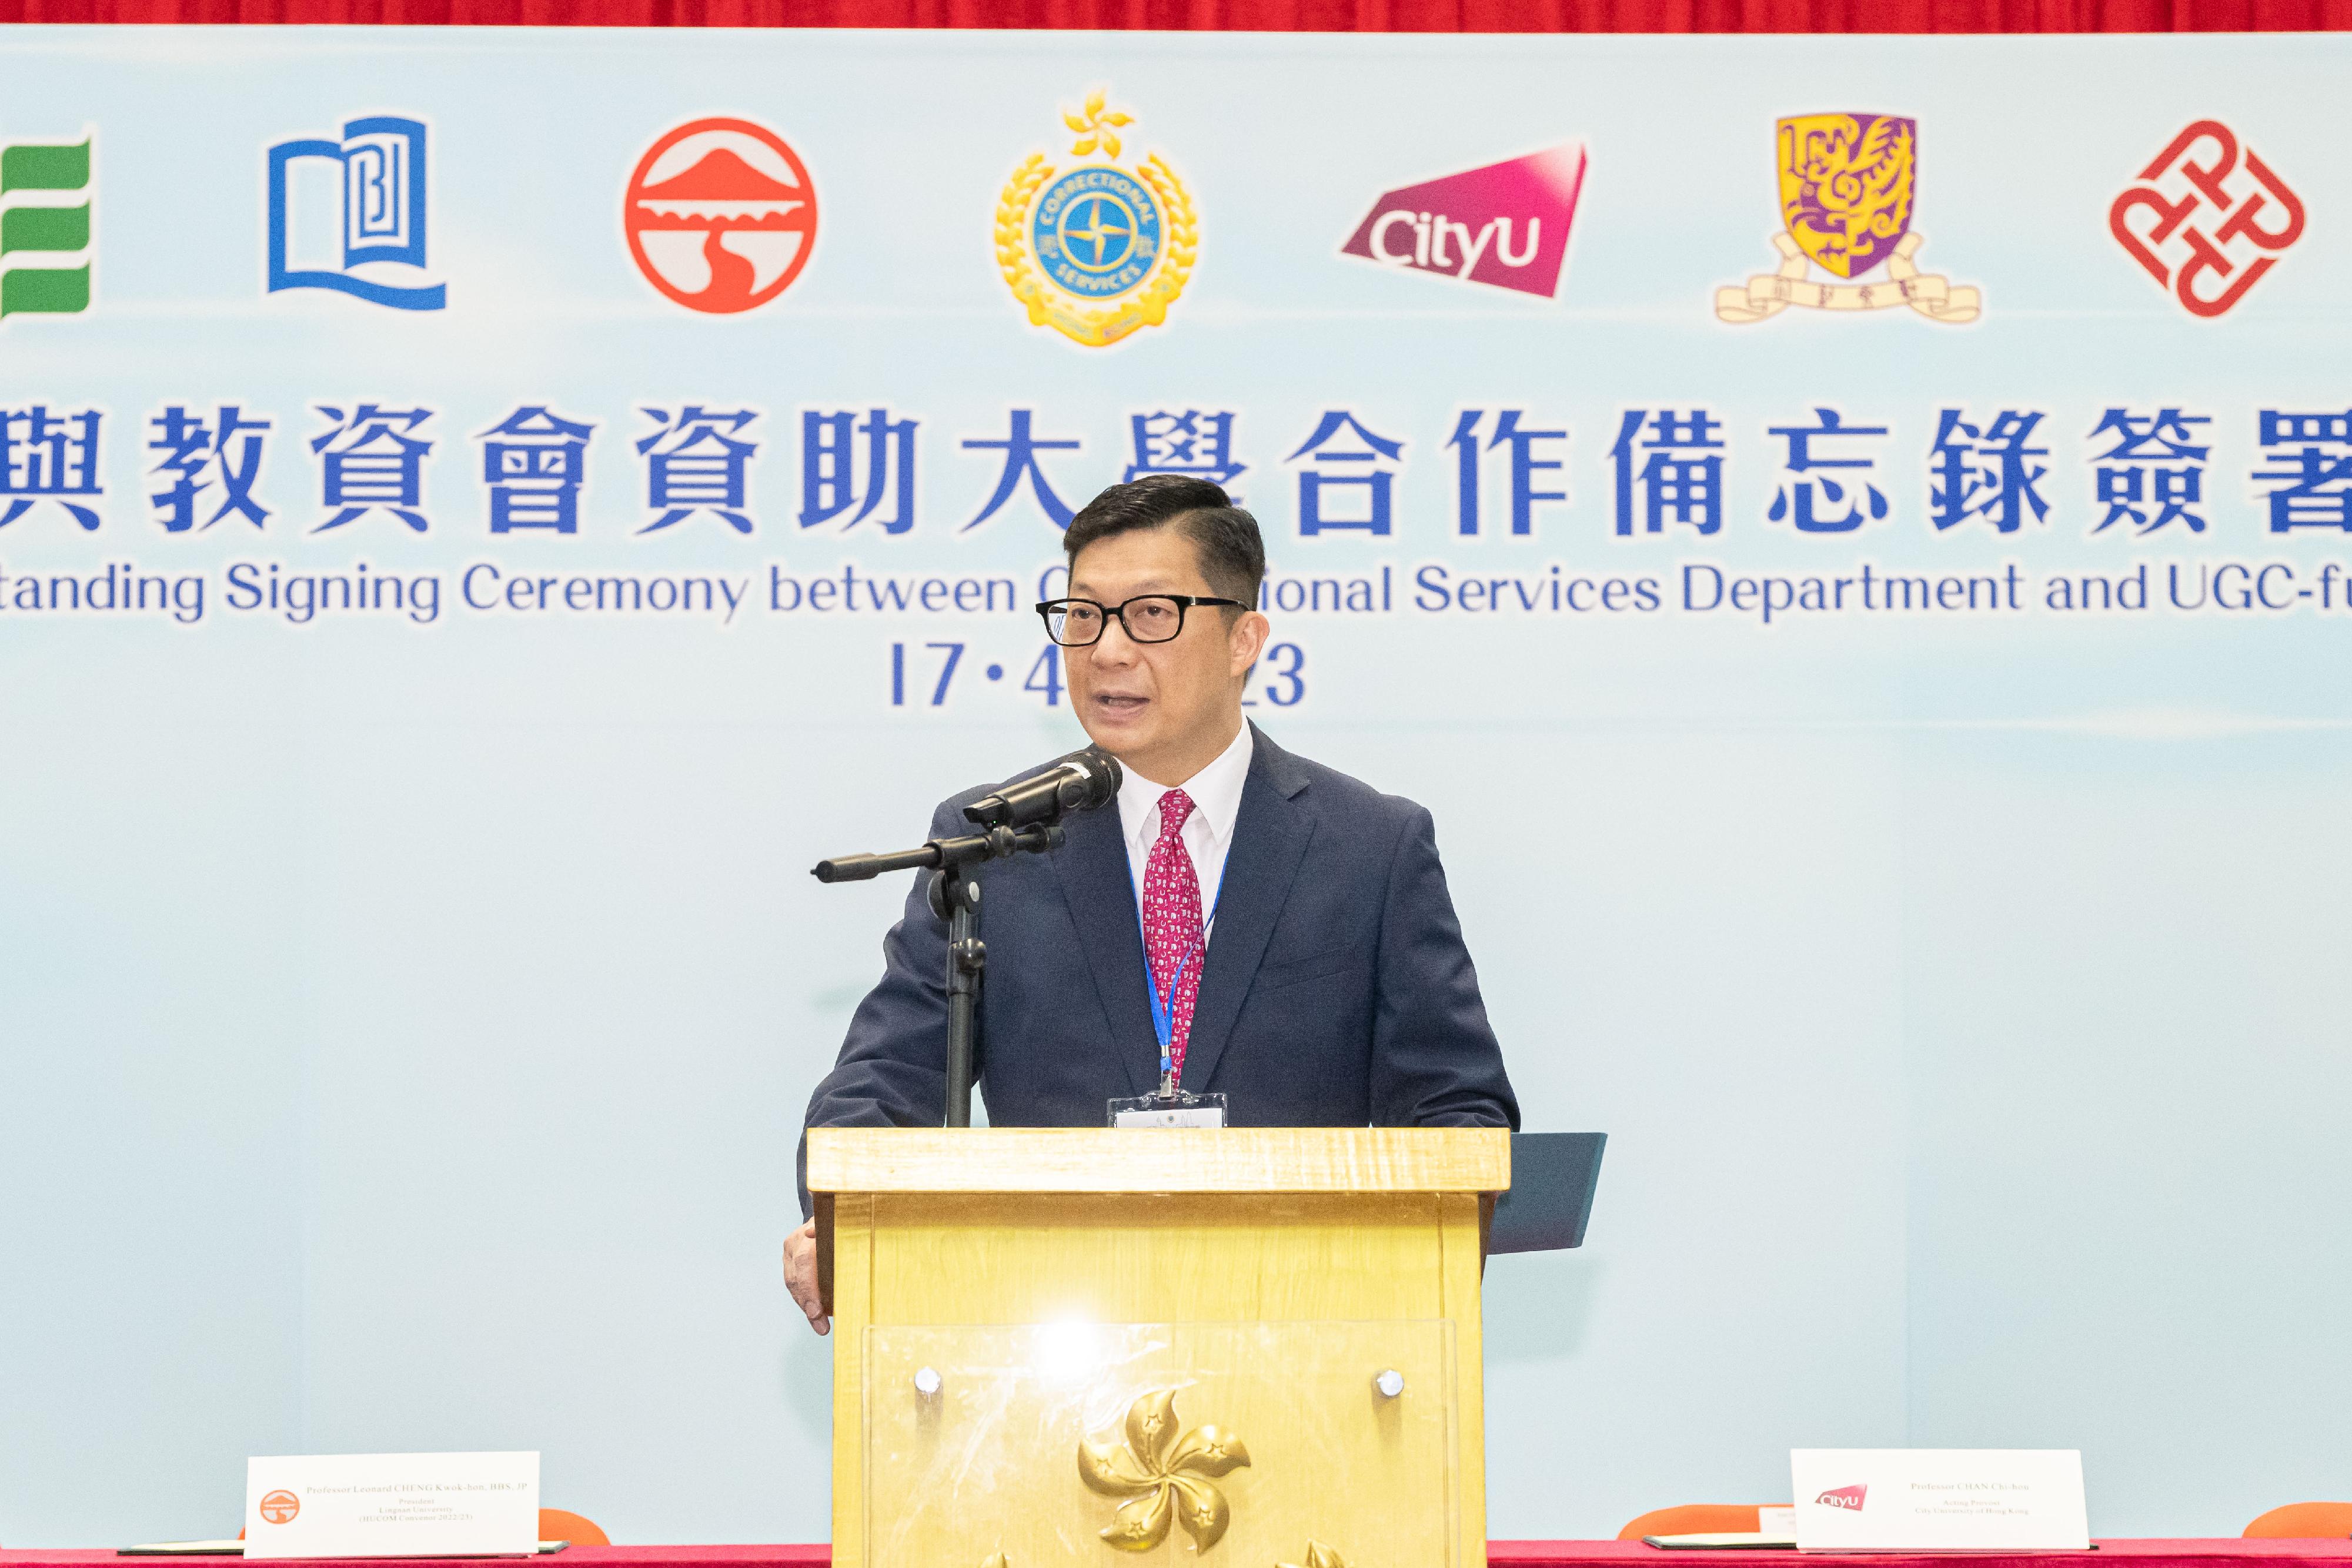 The Correctional Services Department and eight University Grants Committee-funded universities signed a Memorandum of Understanding today (April 17) to facilitate the continuous education of persons in custody who were students of the universities before imprisonment and wish to continue their studies. Photo shows the Secretary for Security, Mr Tang Ping-keung, delivering a speech at the signing ceremony.